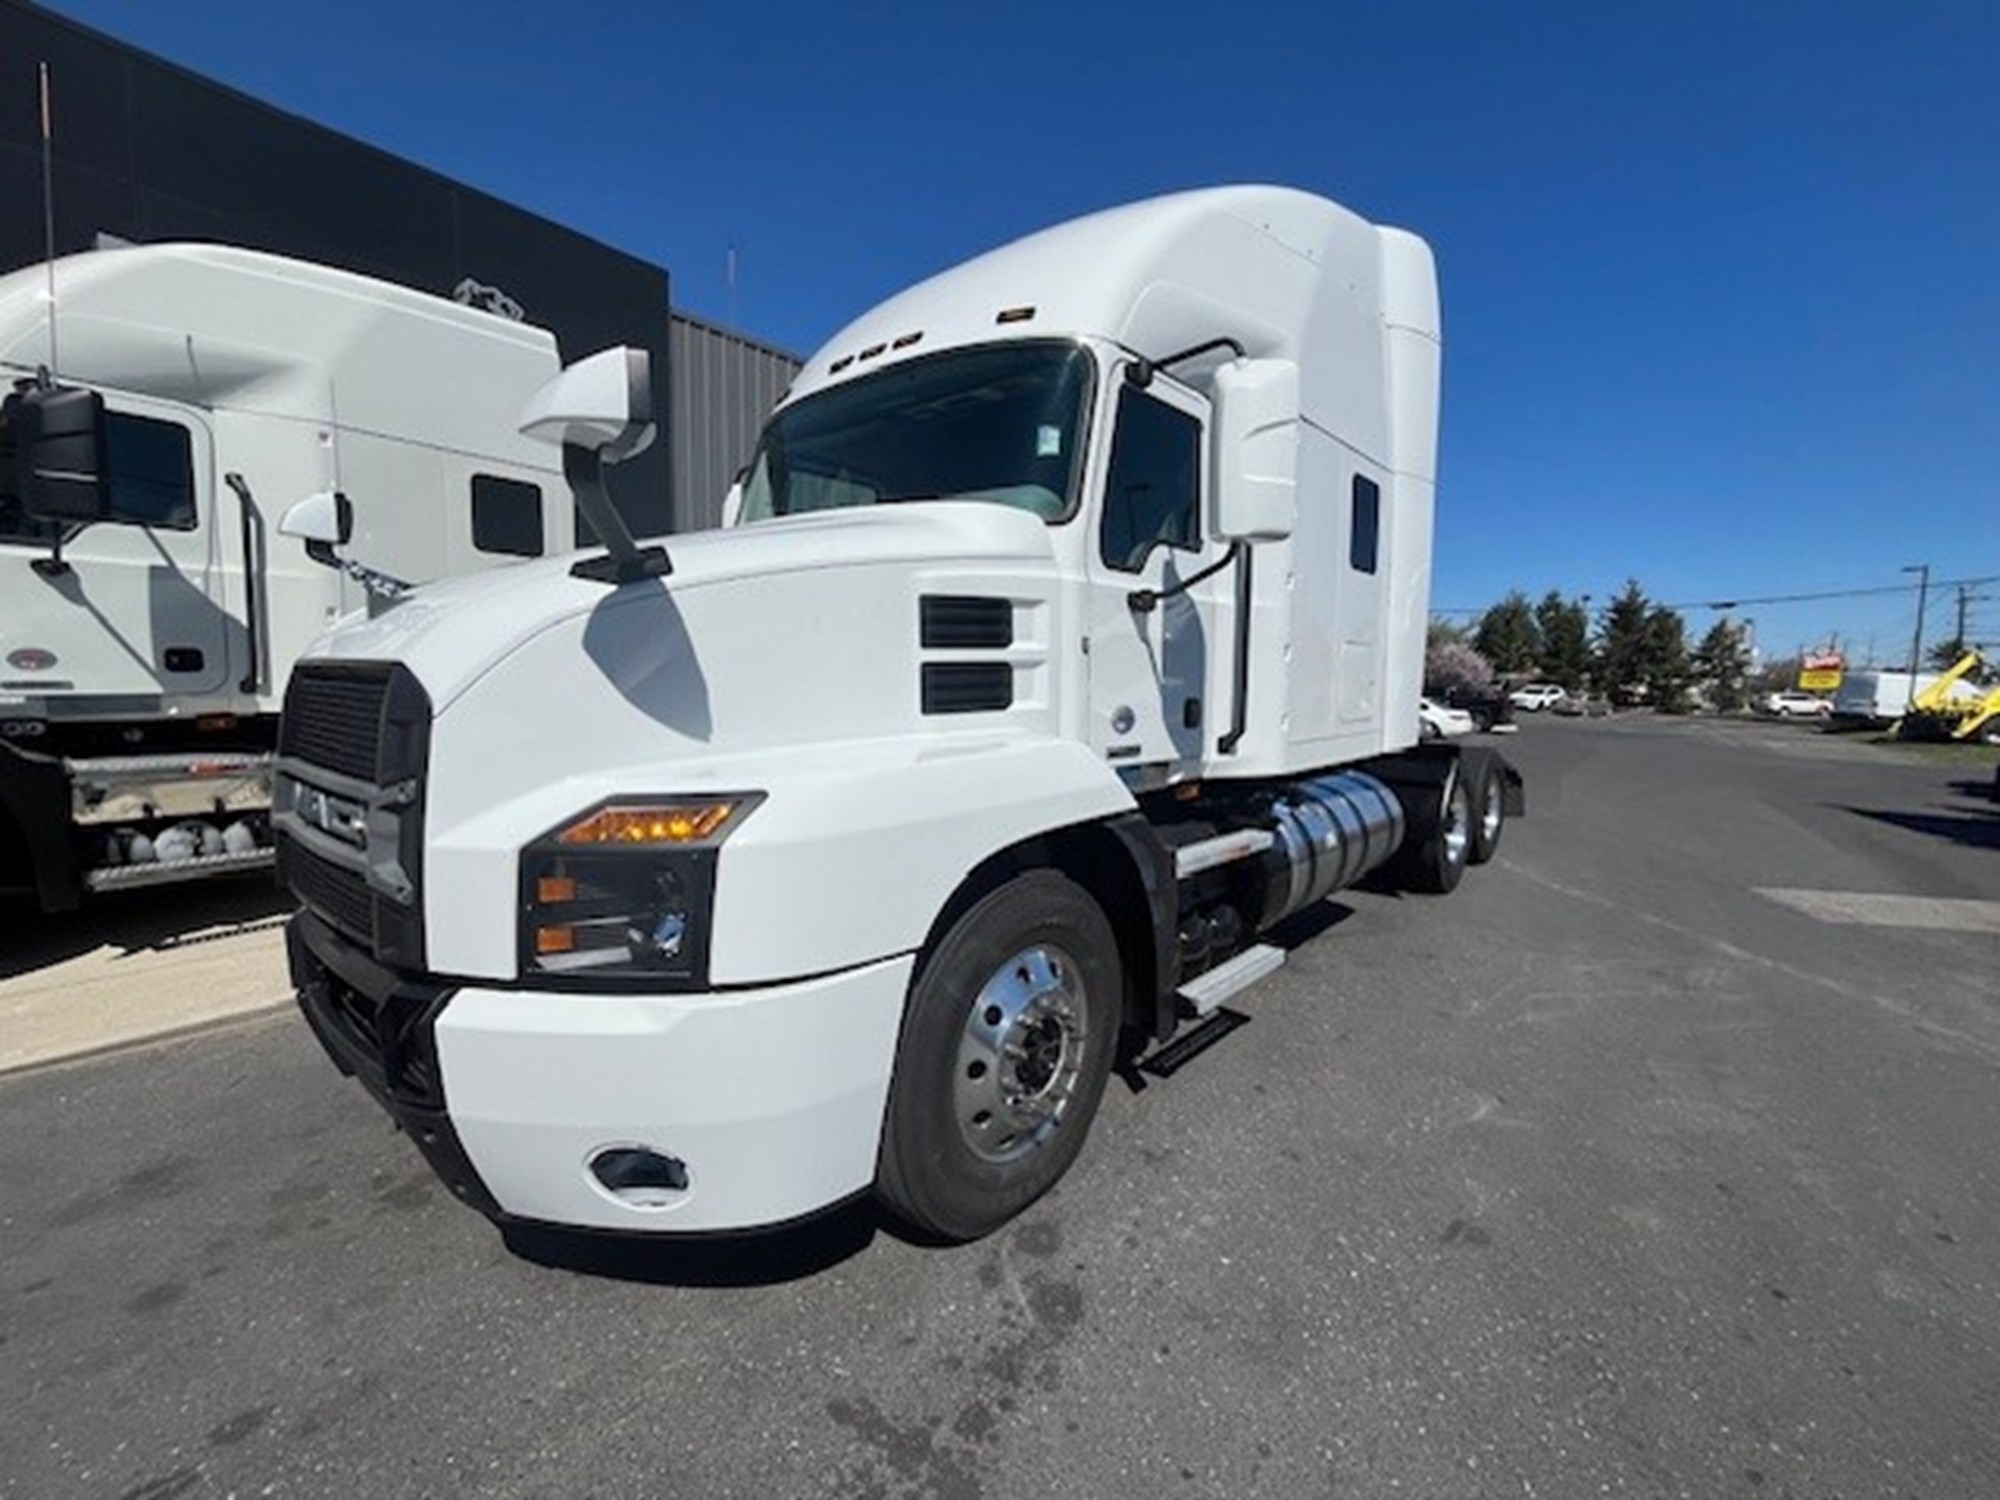 Used Truck Inventory - 1001662 01 - 29